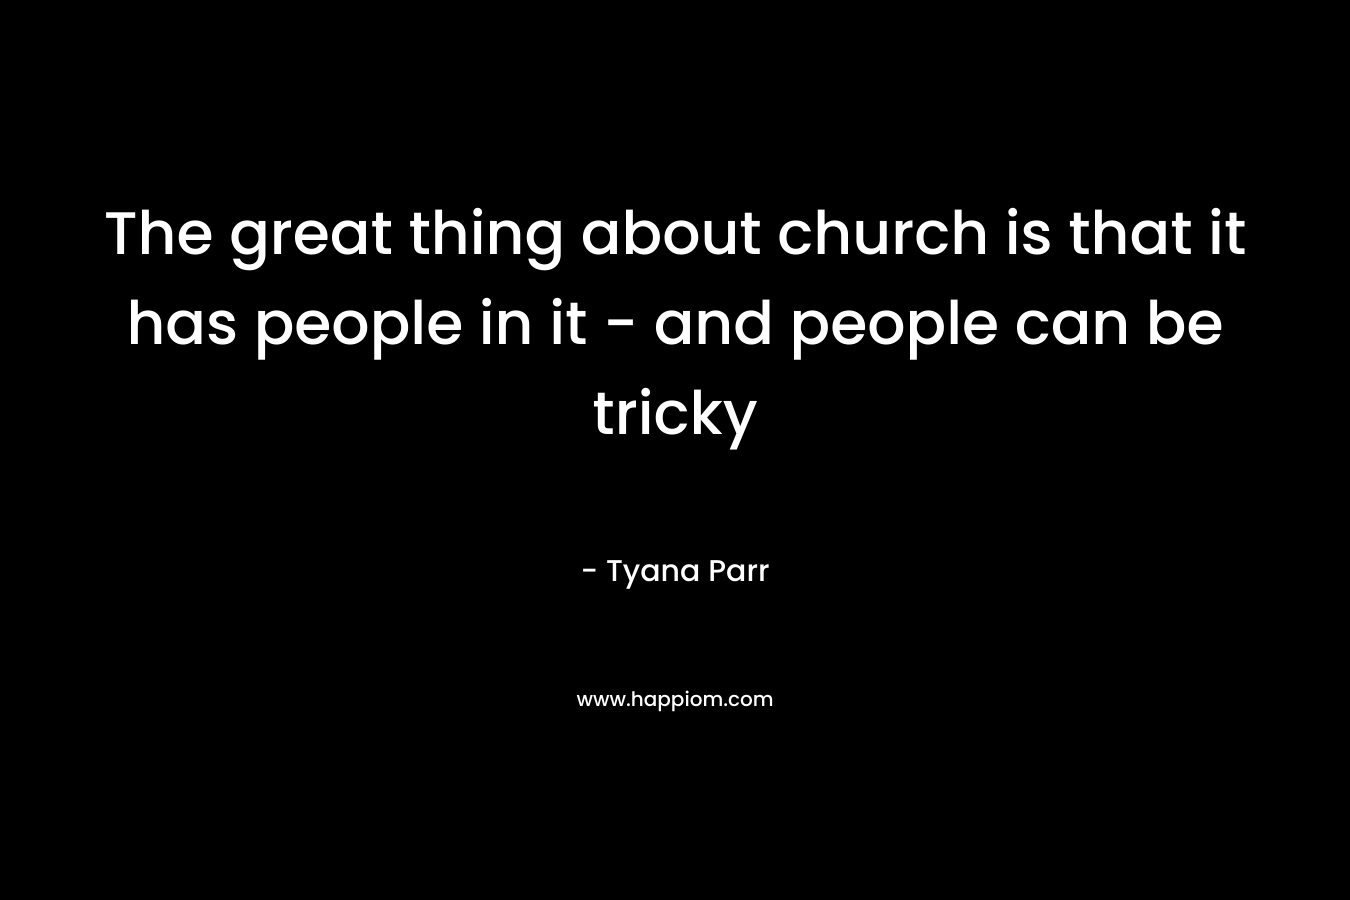 The great thing about church is that it has people in it - and people can be tricky